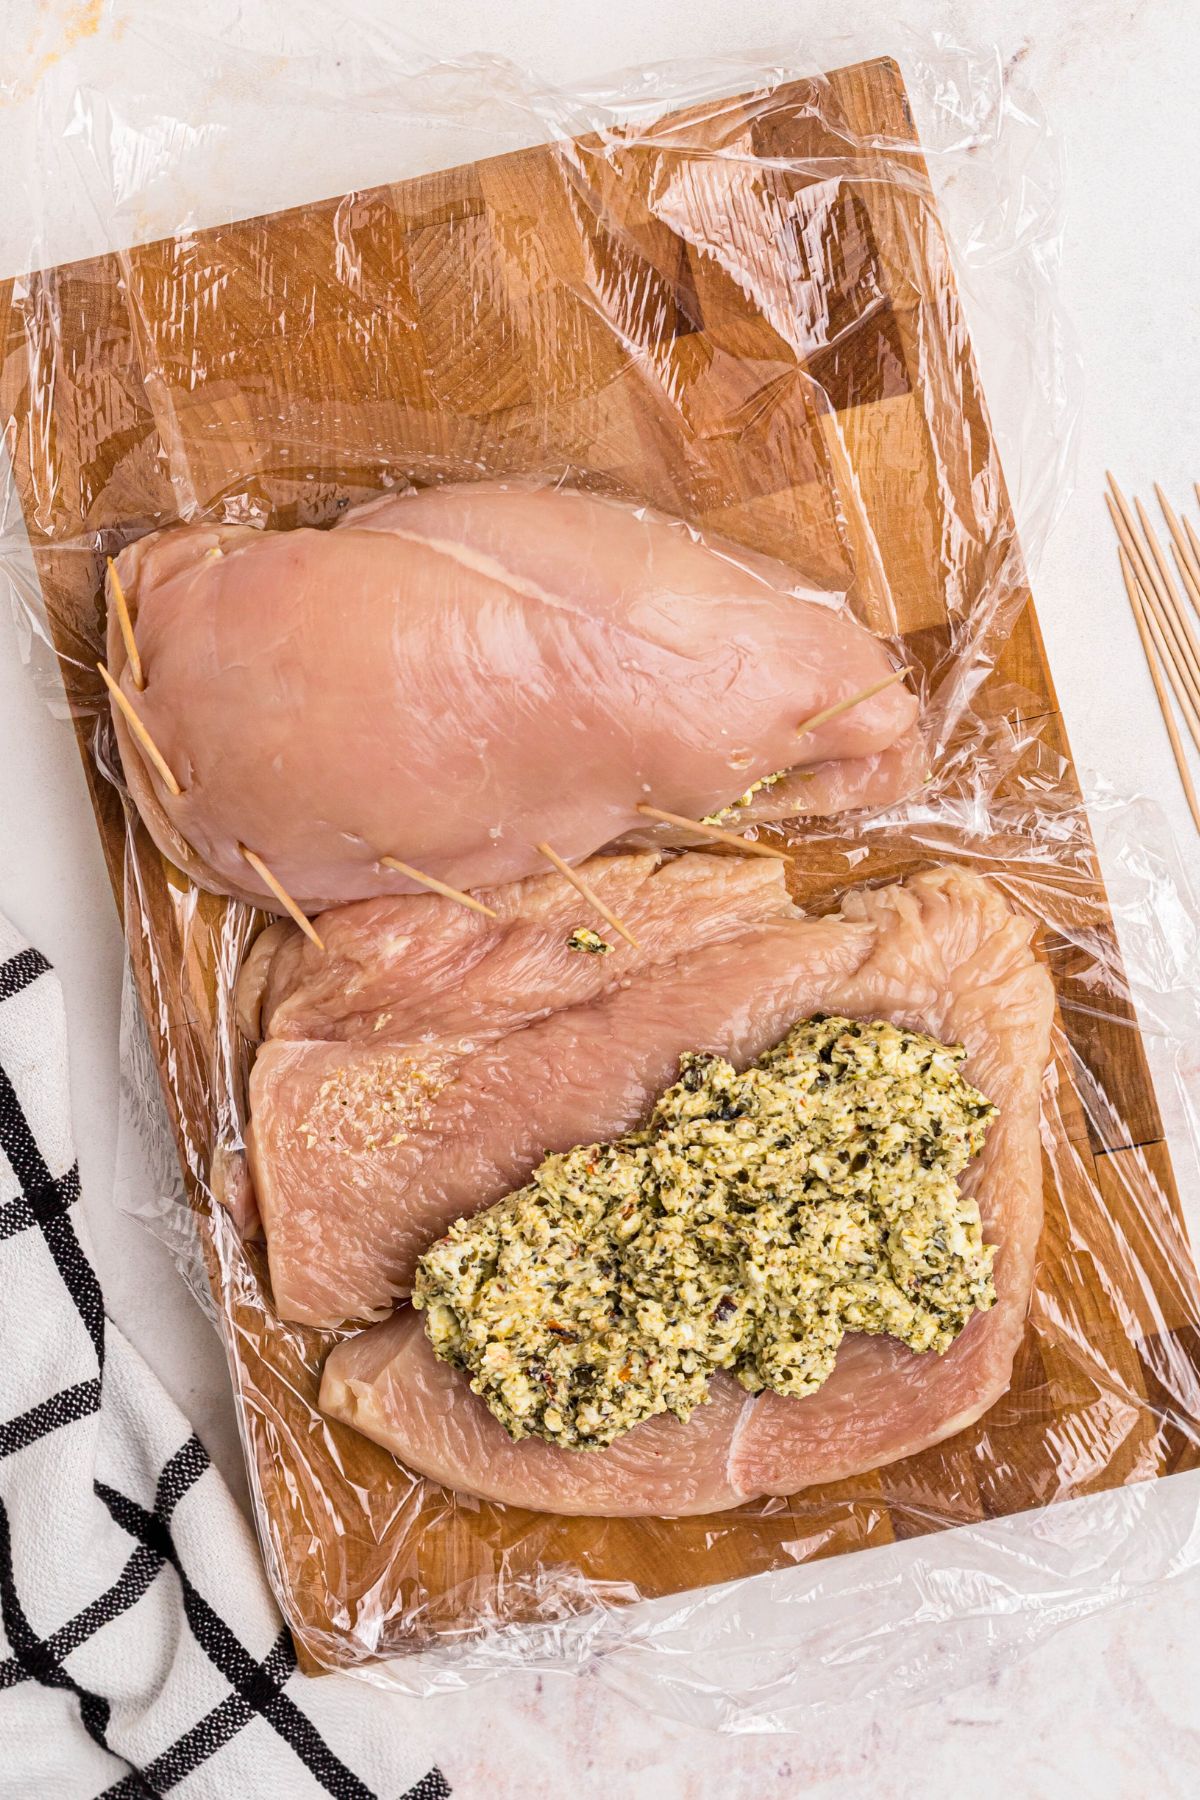 Cream cheese mixture placed in the center of chicken breast and then wrapped in chicken and sealed with toothpicks.